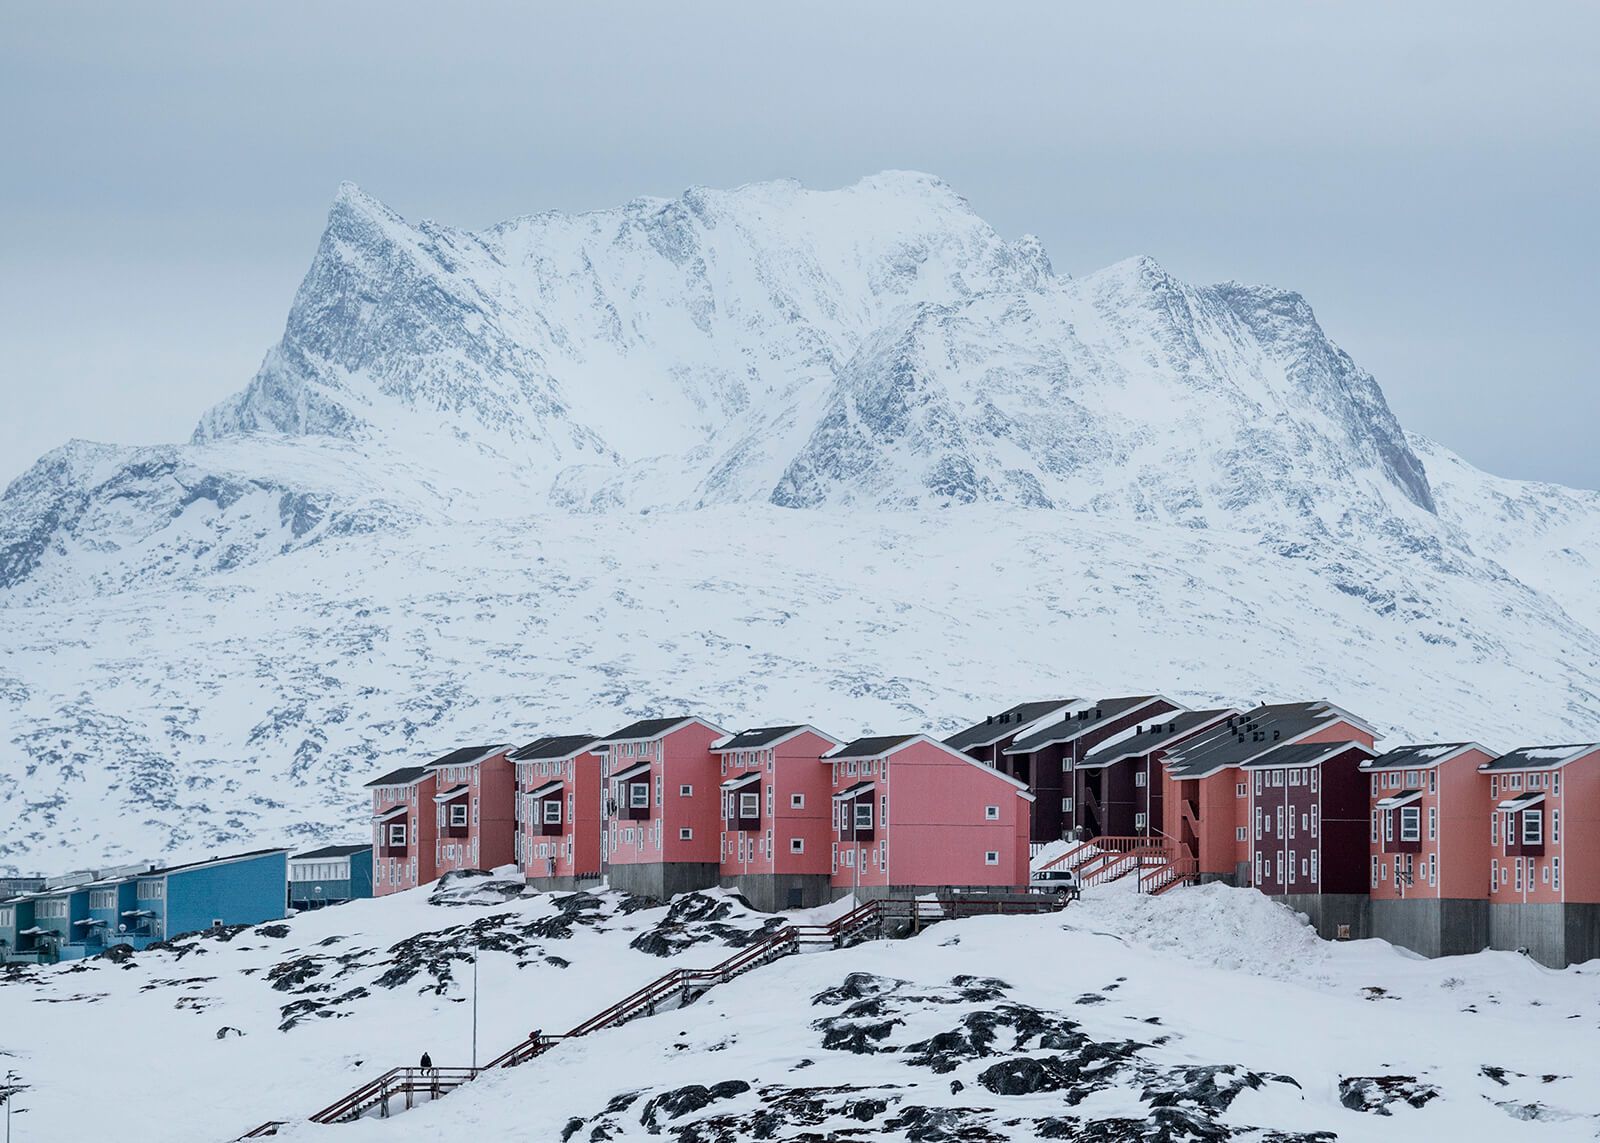 The iconic mountain of Sermitsiaq rises up behind a row of apartment buildings in Nuuk. Image by Jonas Bendiksen/Magnum Photos. Greenland, 2018.